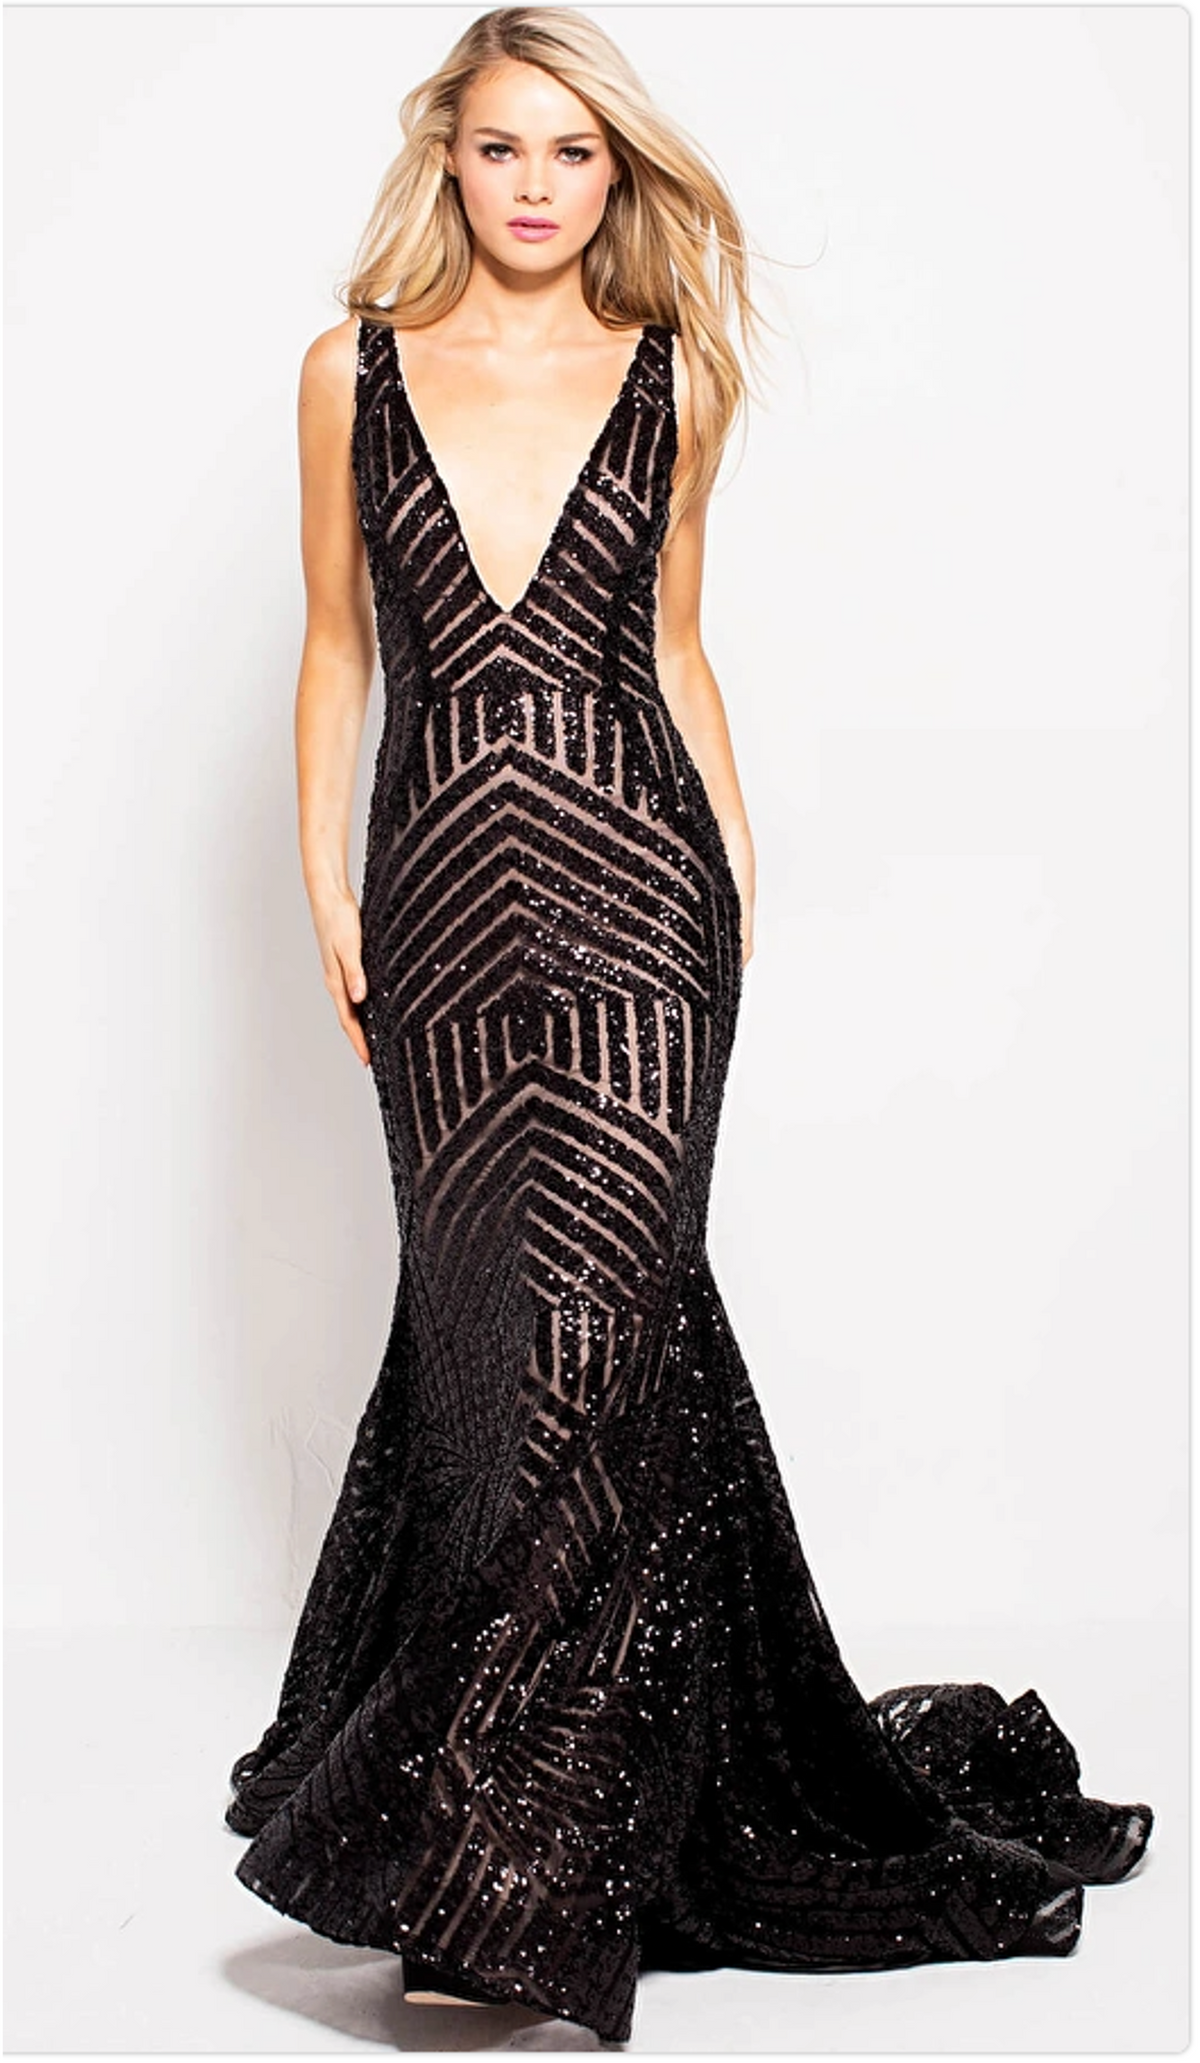 Stunning Jovani 59762 Sequin Embellished Prom Gown with Trumpet Silhouette and Plunging V-Neck - Ideal for Proms, Weddings and Black-Tie Events - Available in Multiple Sizes and Colors.  Color in the picture is black/Nude.